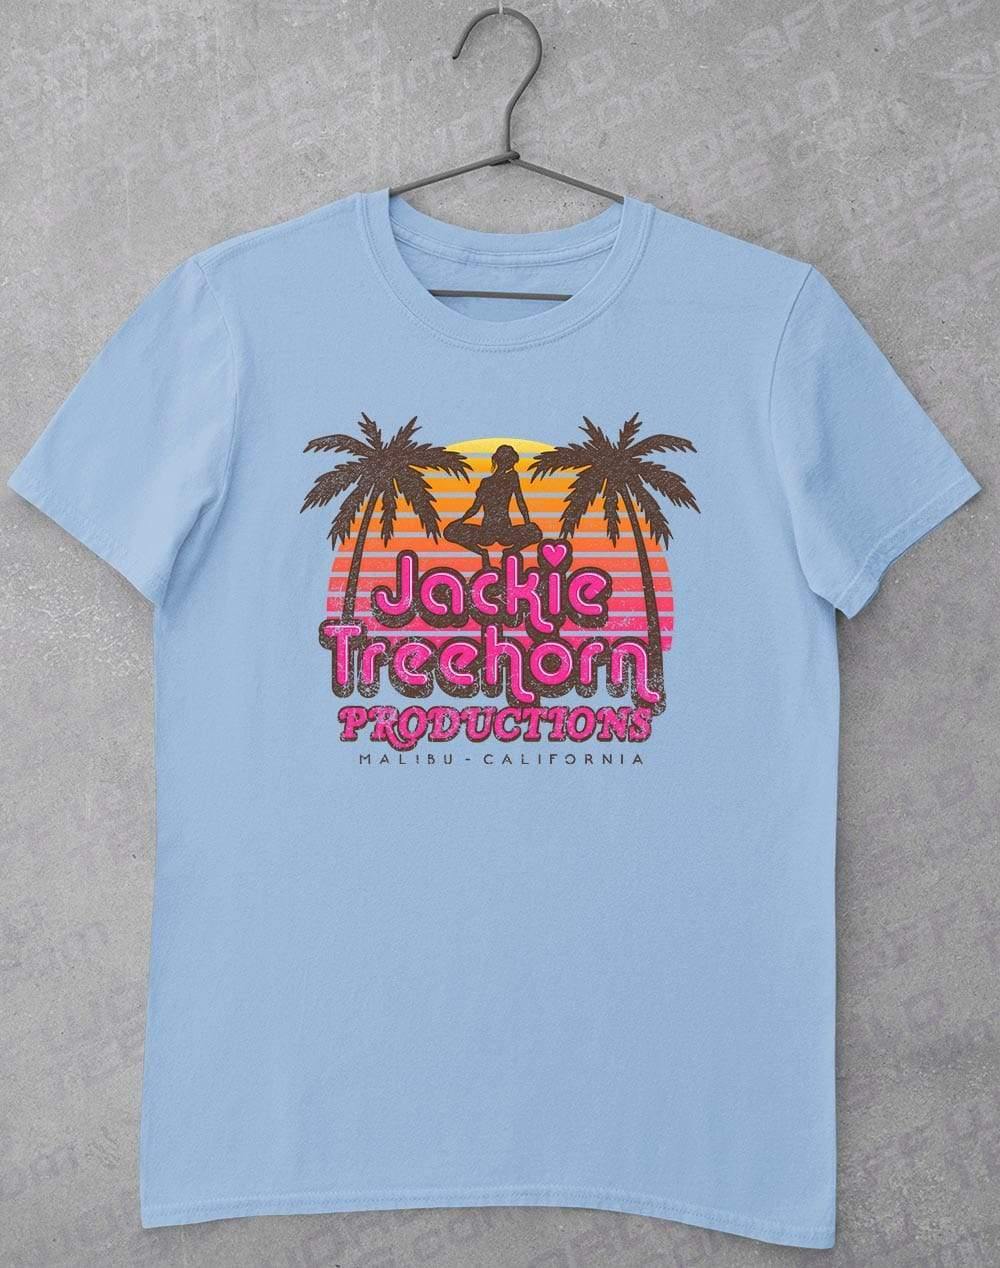 Jackie Treehorn Productions T-Shirt S / Light Blue  - Off World Tees